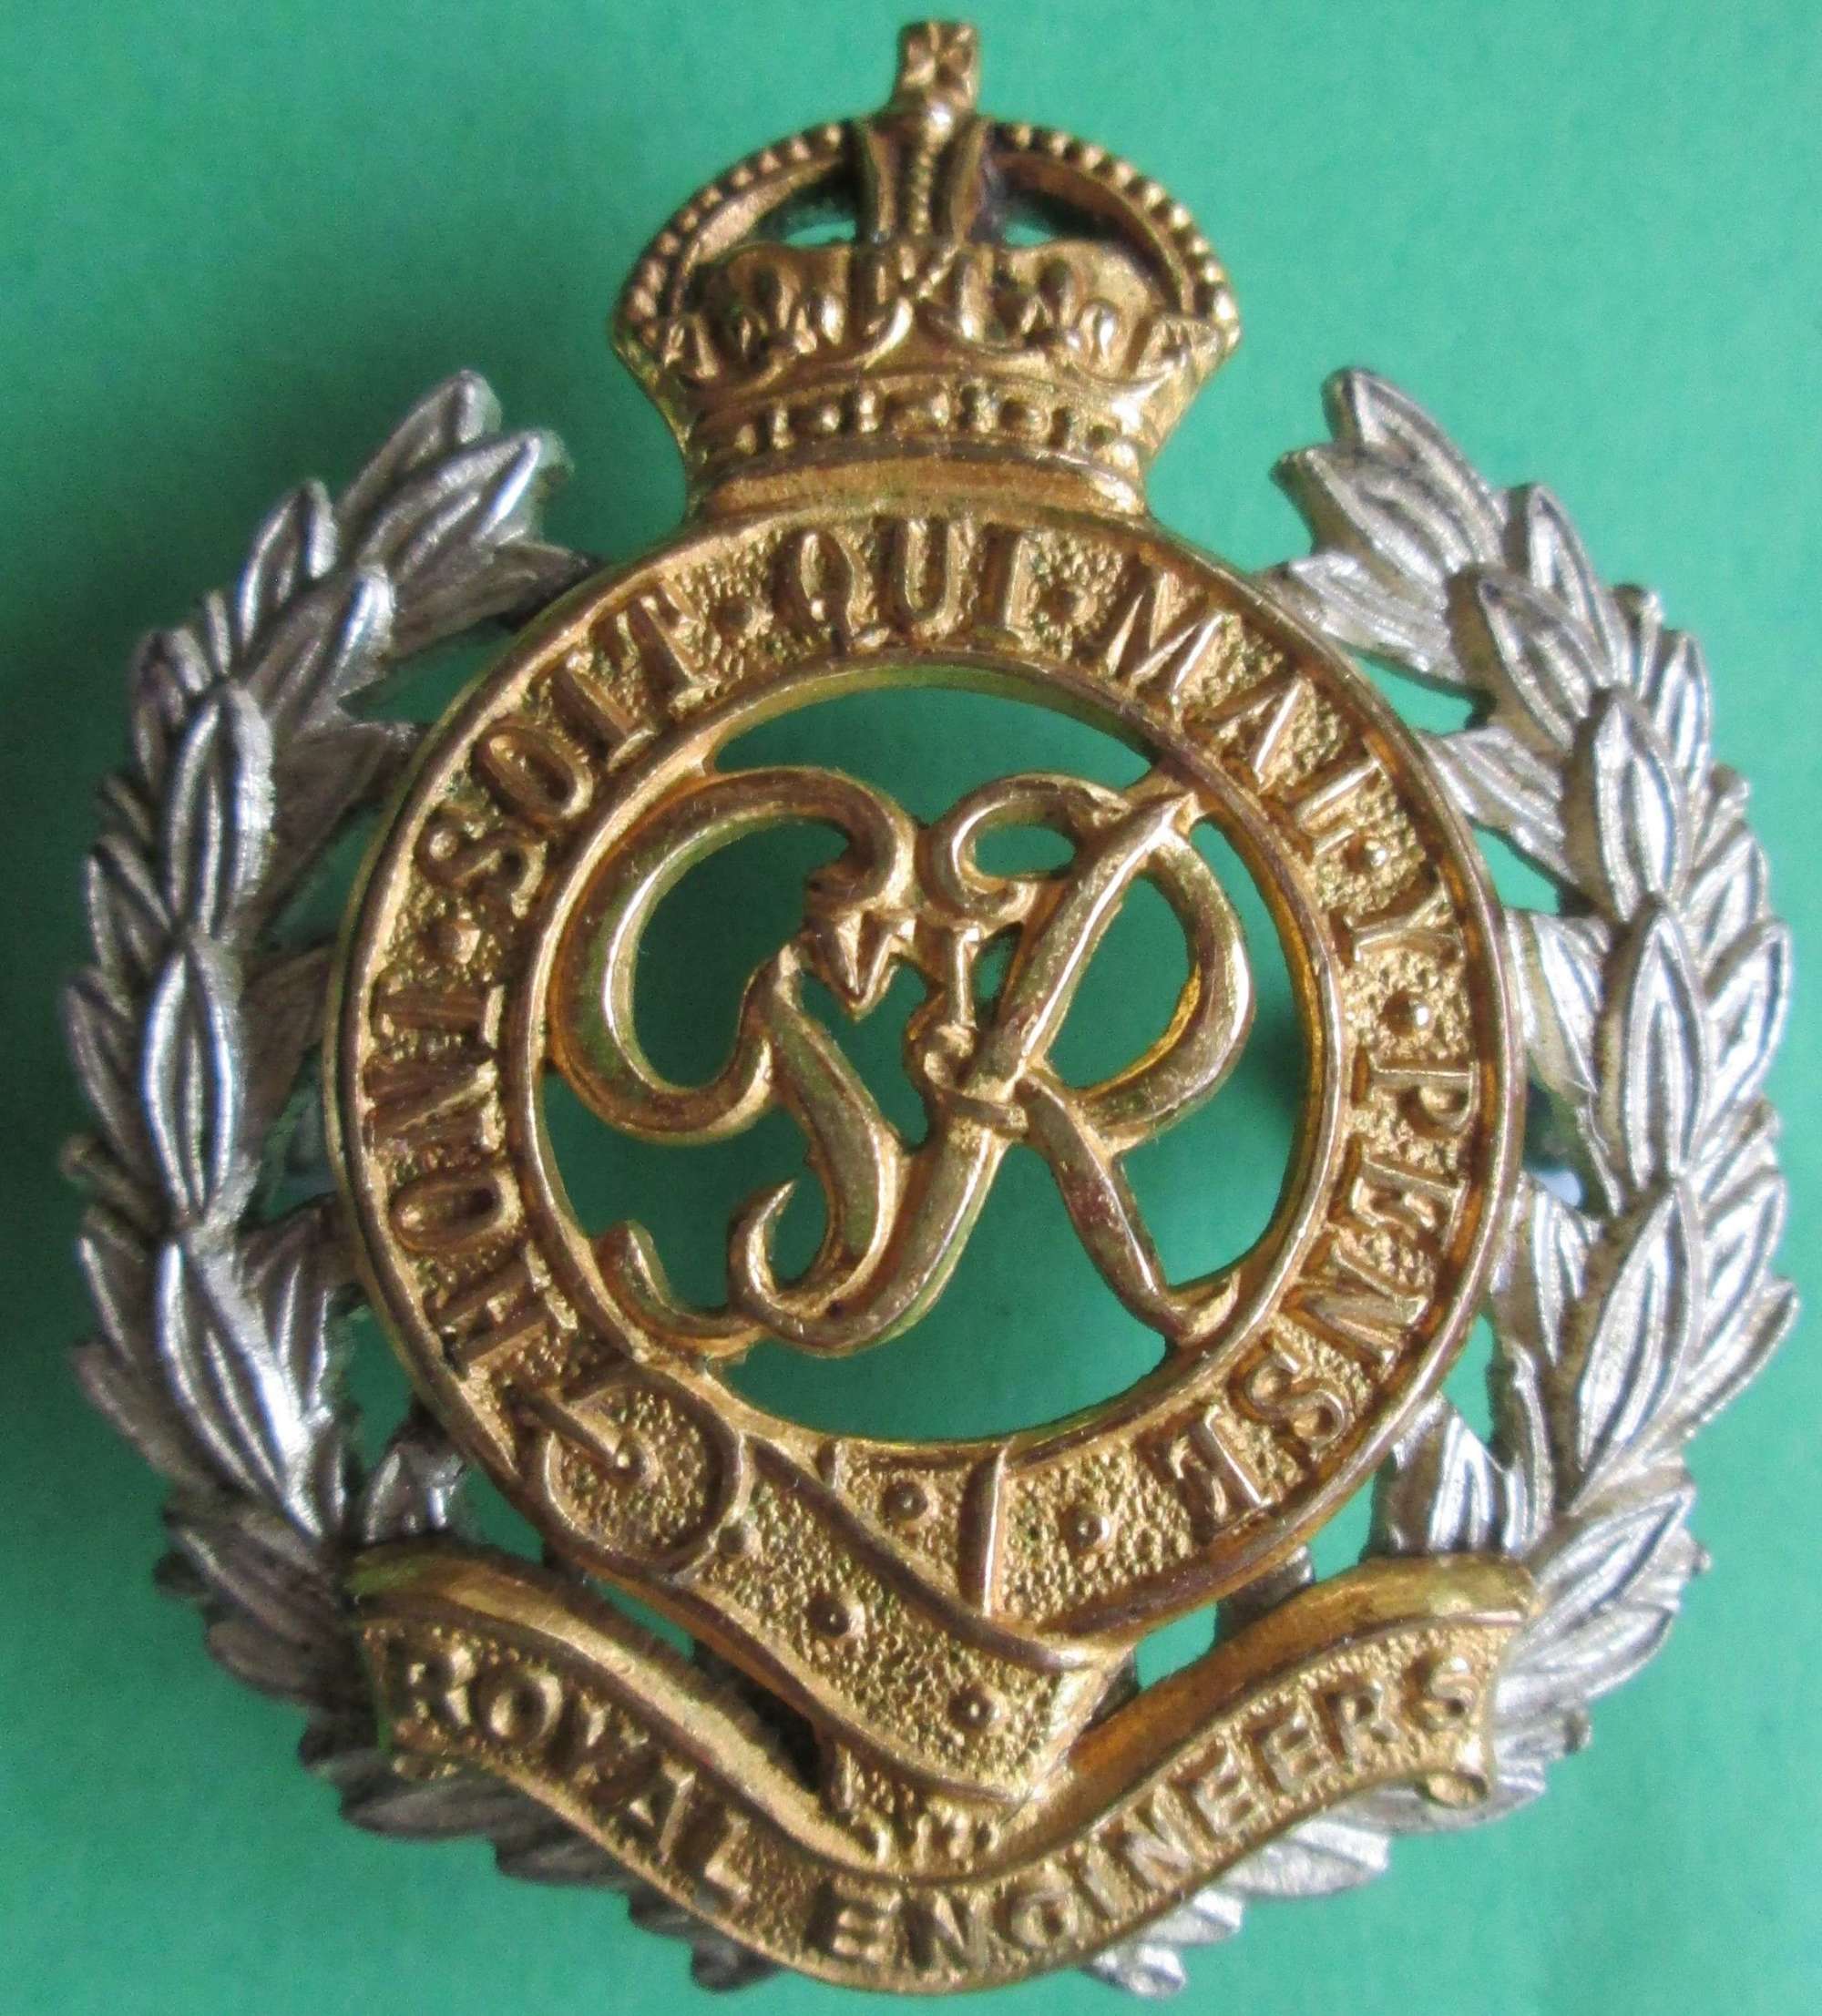 A POST 1947 OTHER RANKS ROYAL ENGINEERS GILT CAP BADGE